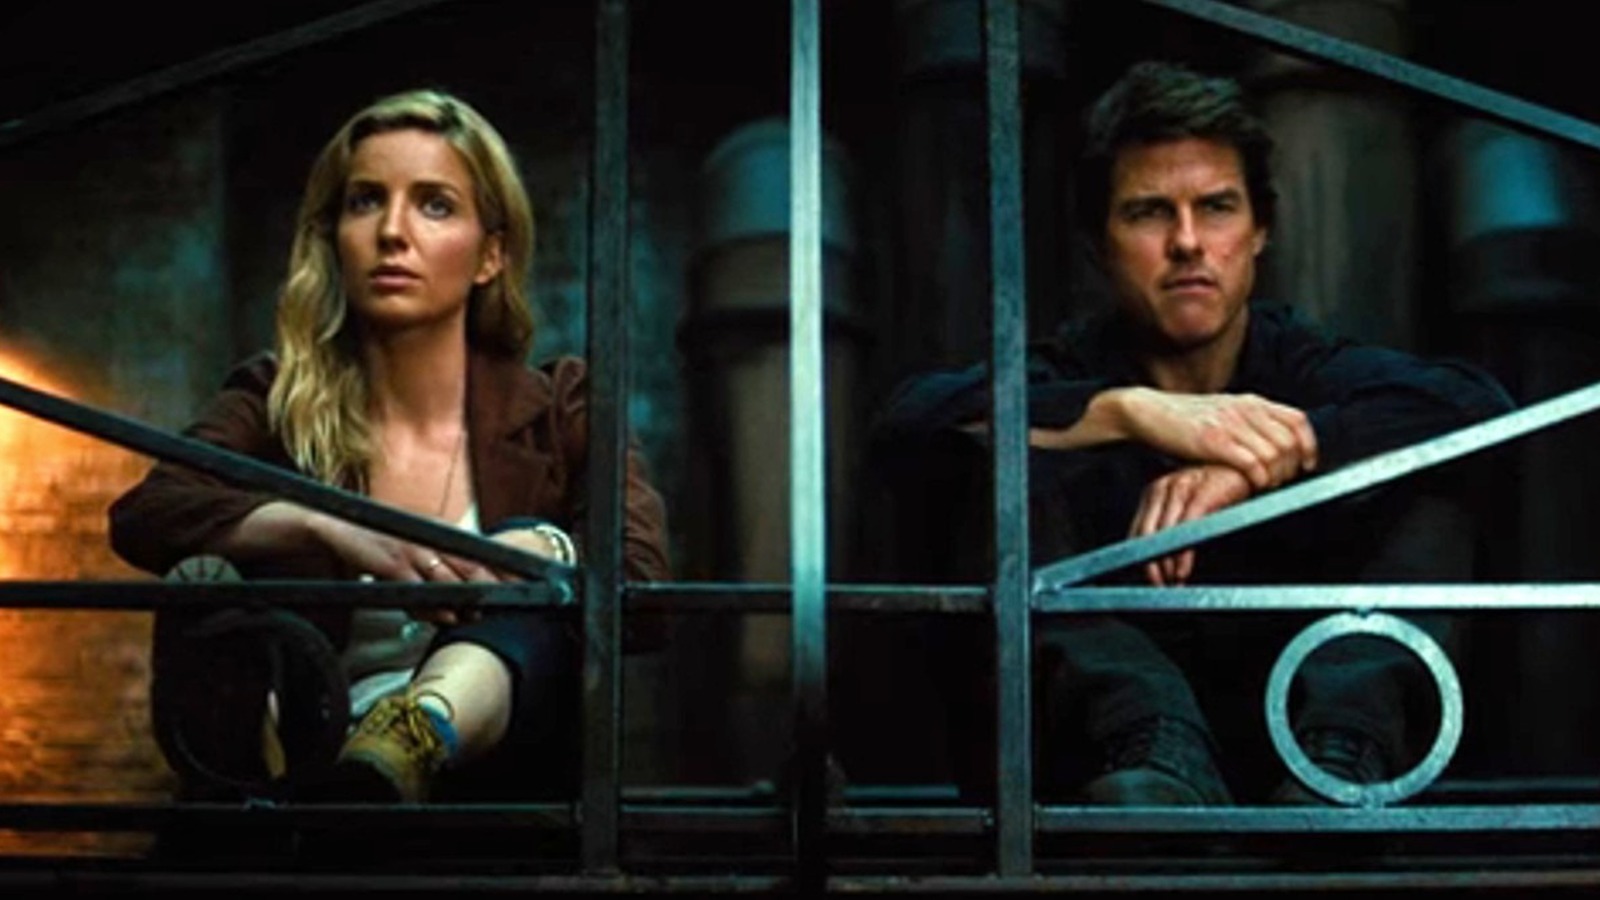 The Mummy Annabelle Wallis Had To Beat Tom Cruise At One Thing To Get More Scenes